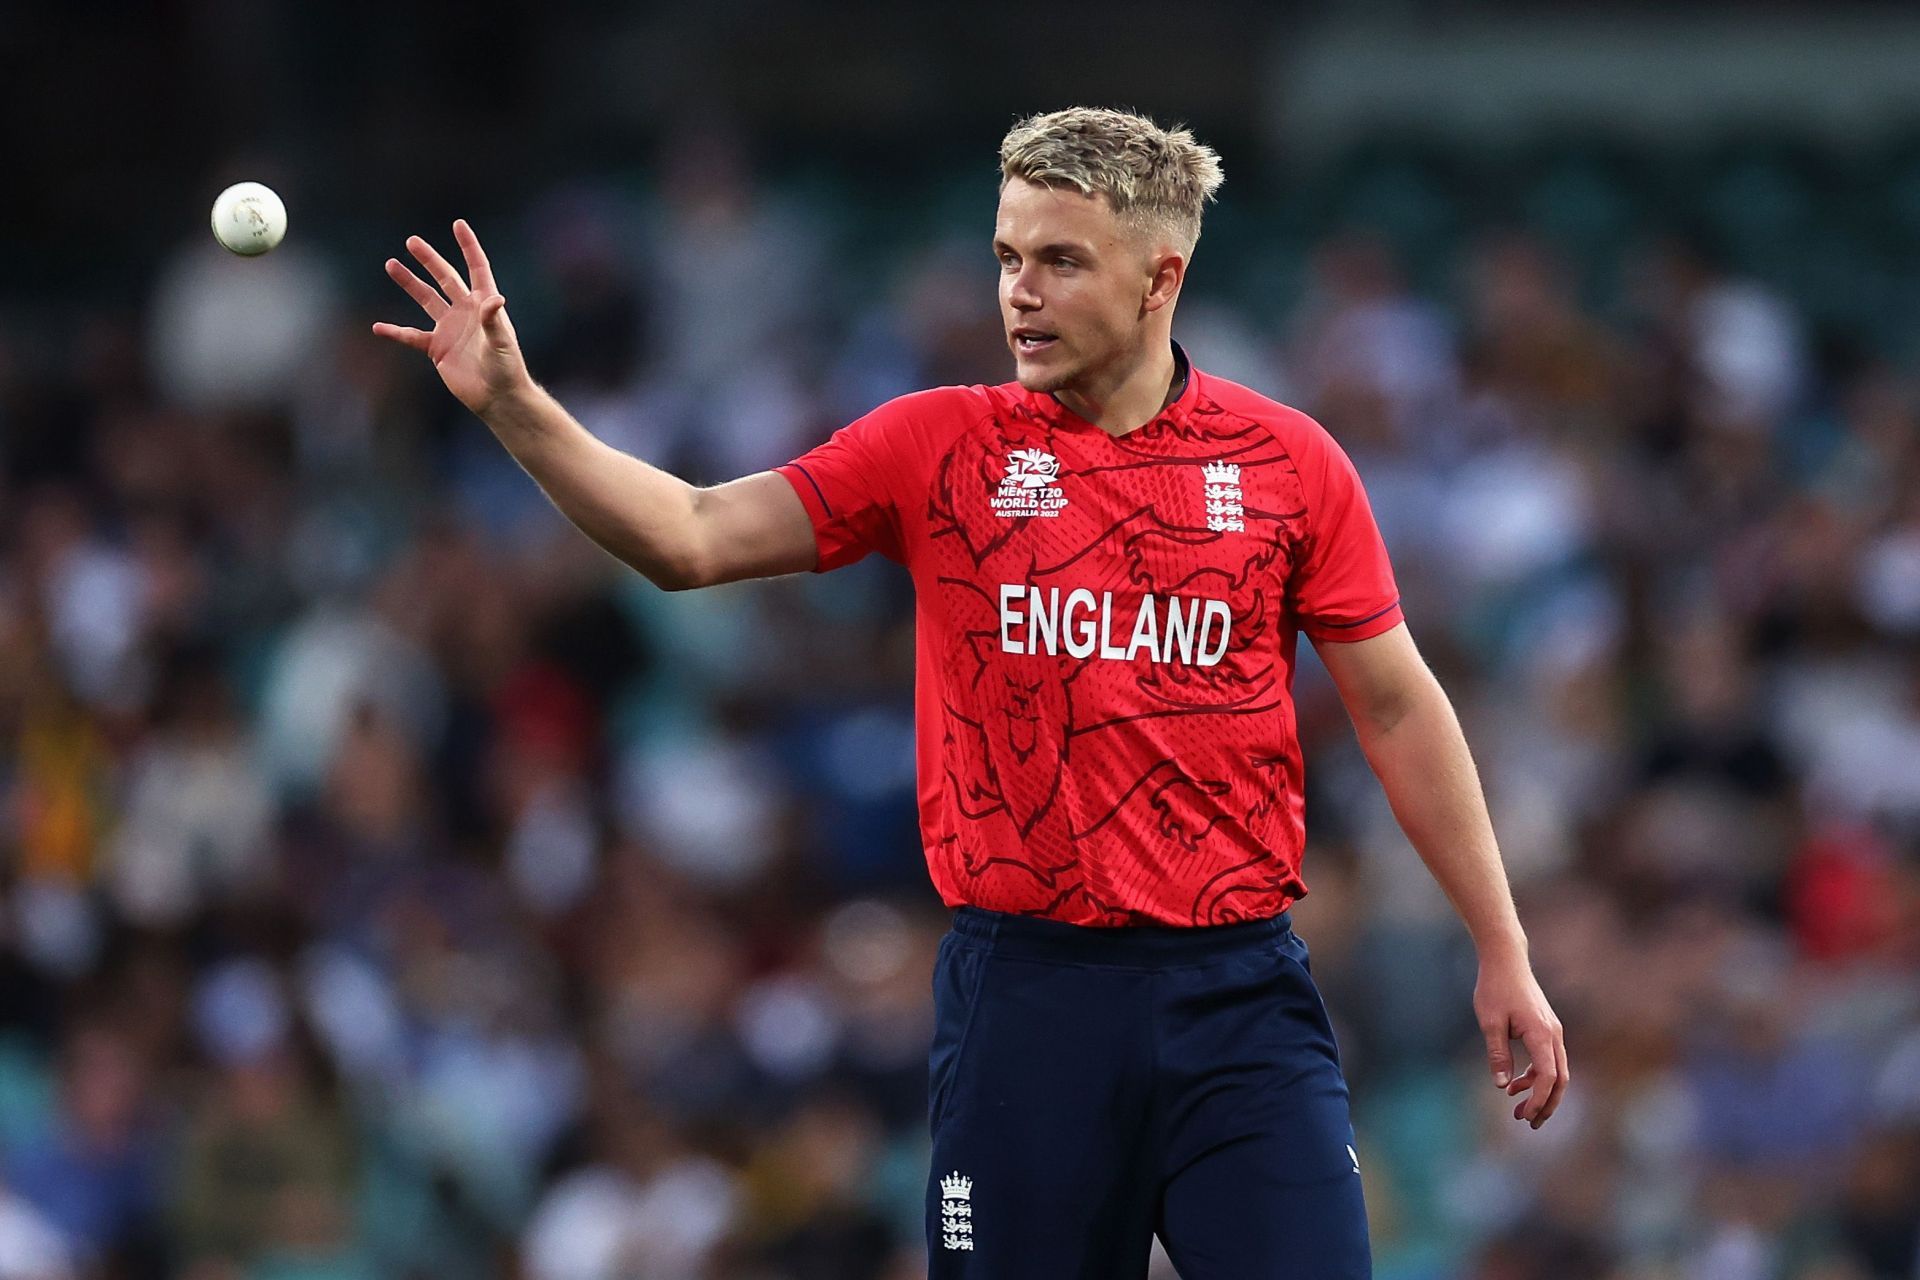 England all-rounder Sam Curran has impressed with the ball. Pic: Getty Images